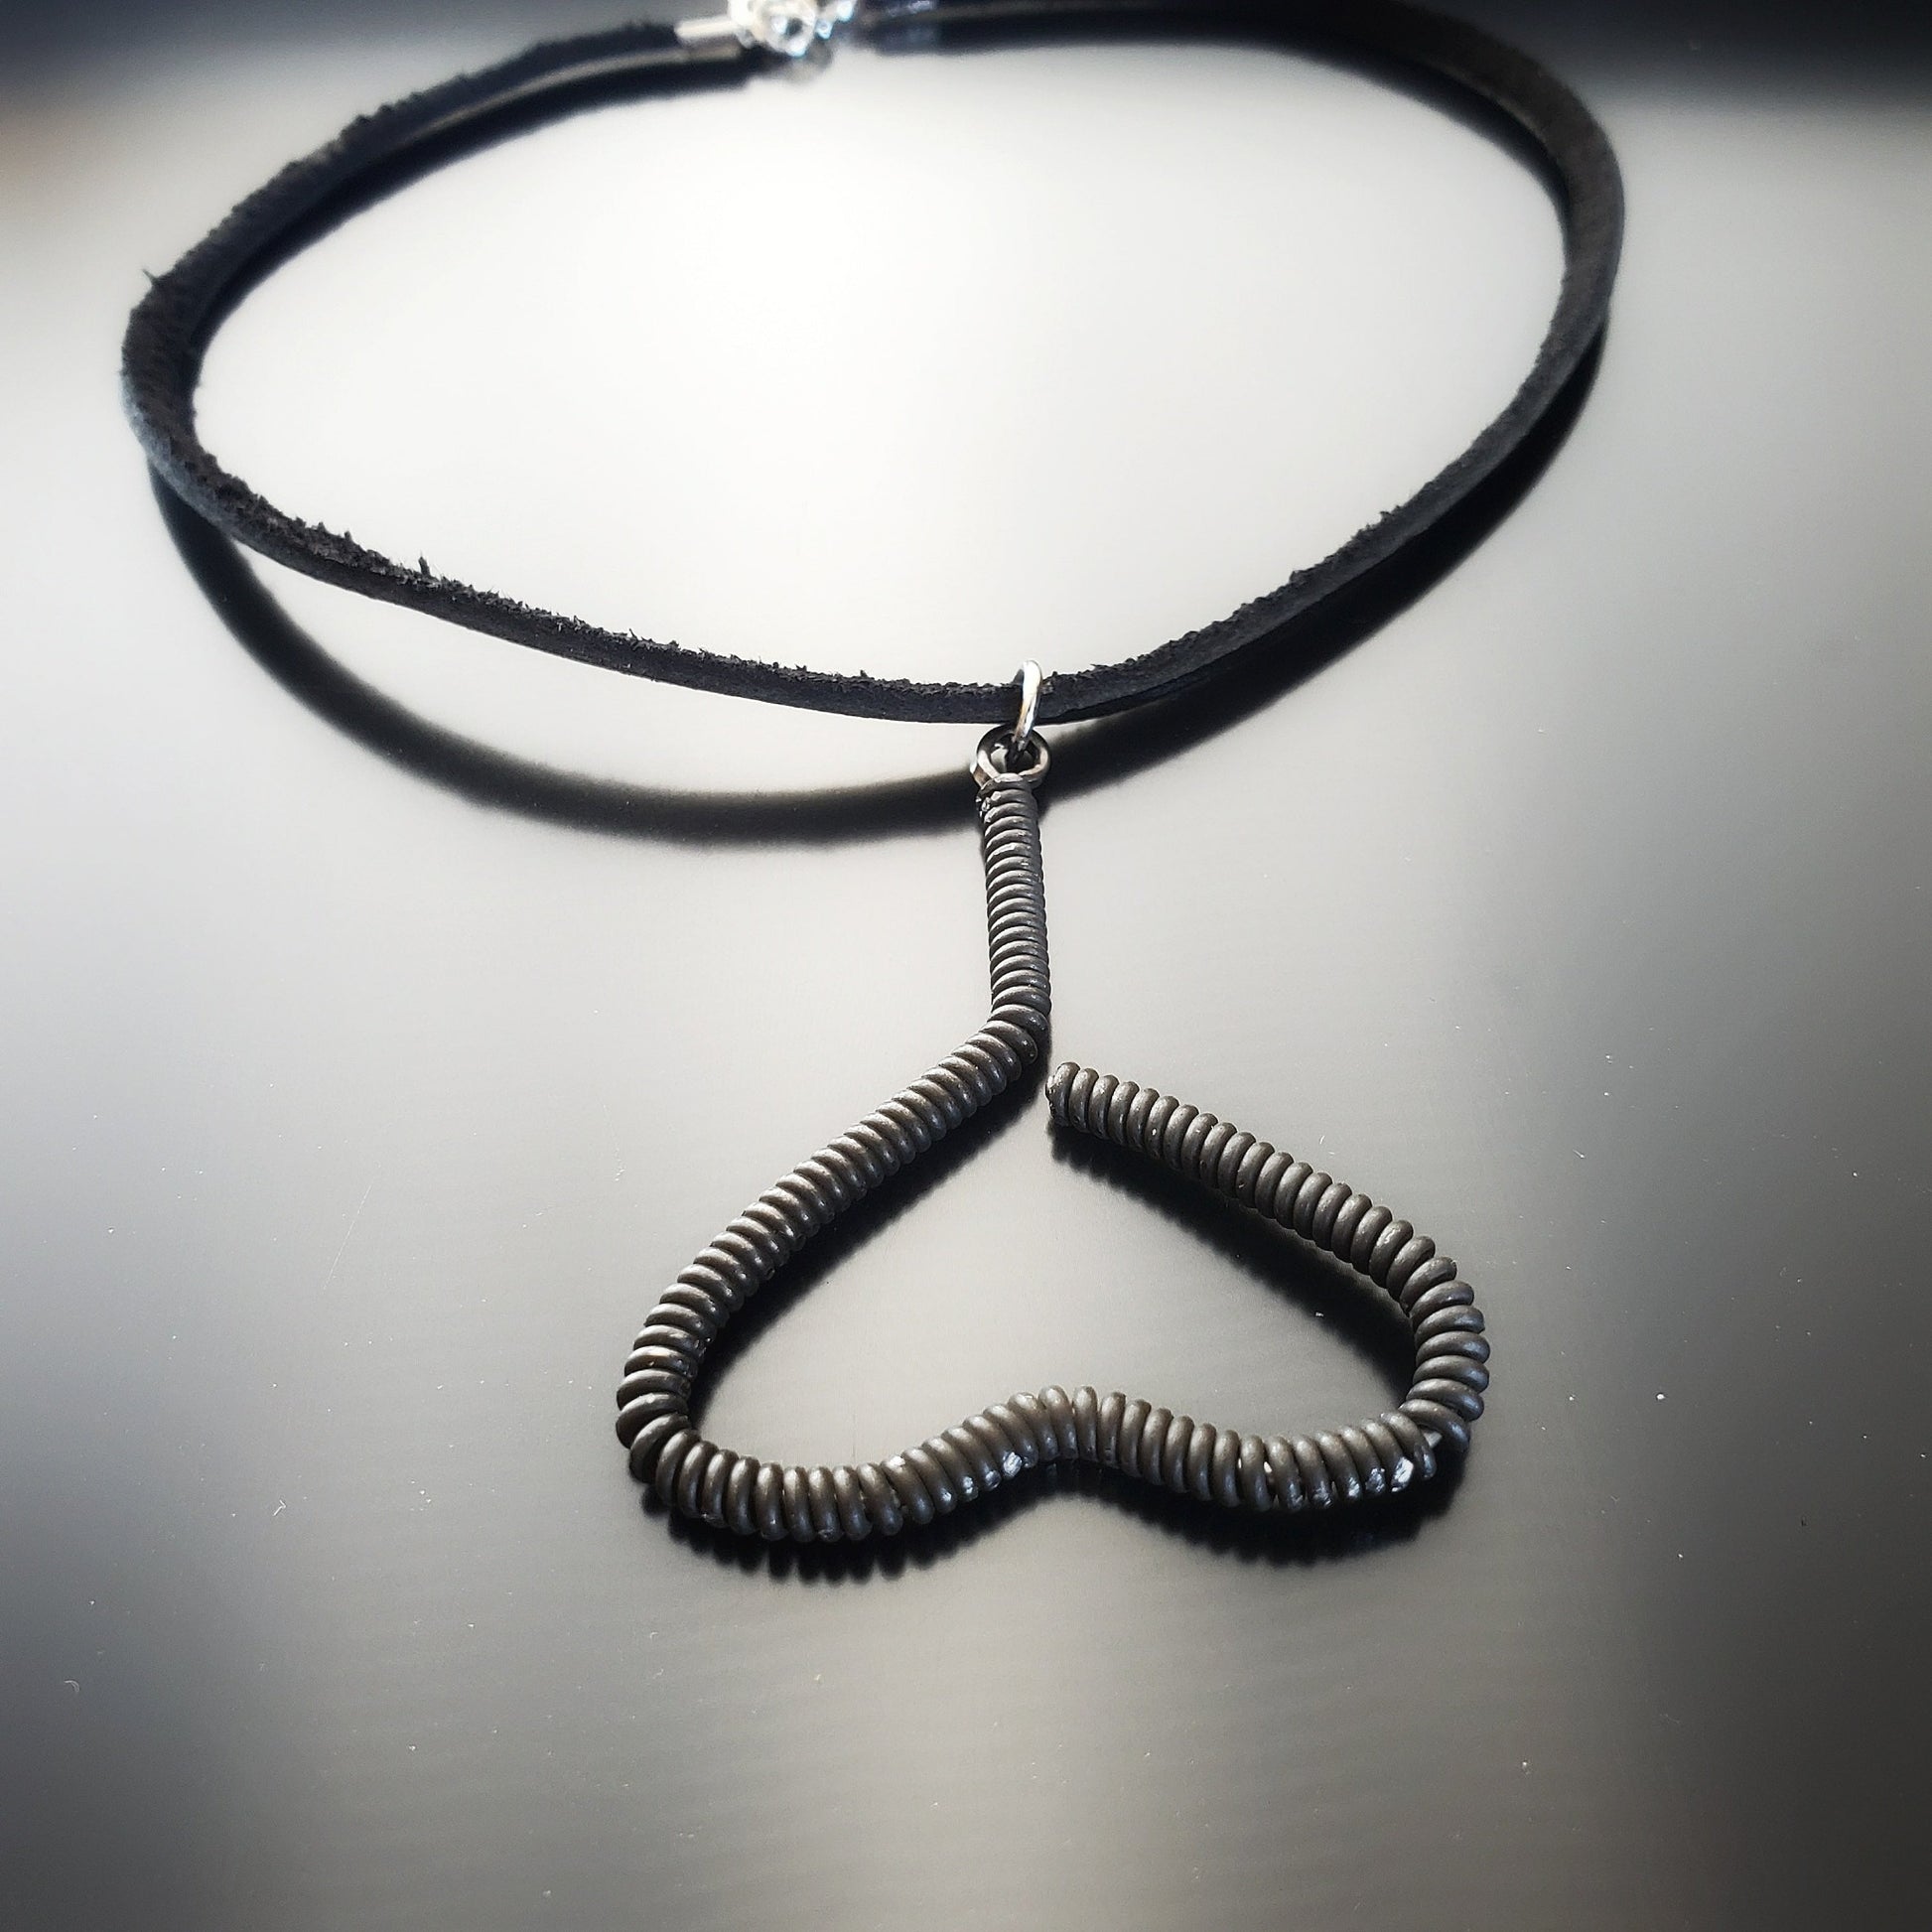 necklace - pendant is in the shape of an upside down heart and is made from a black upcycled piano string - pendant hangs off a black leather cord